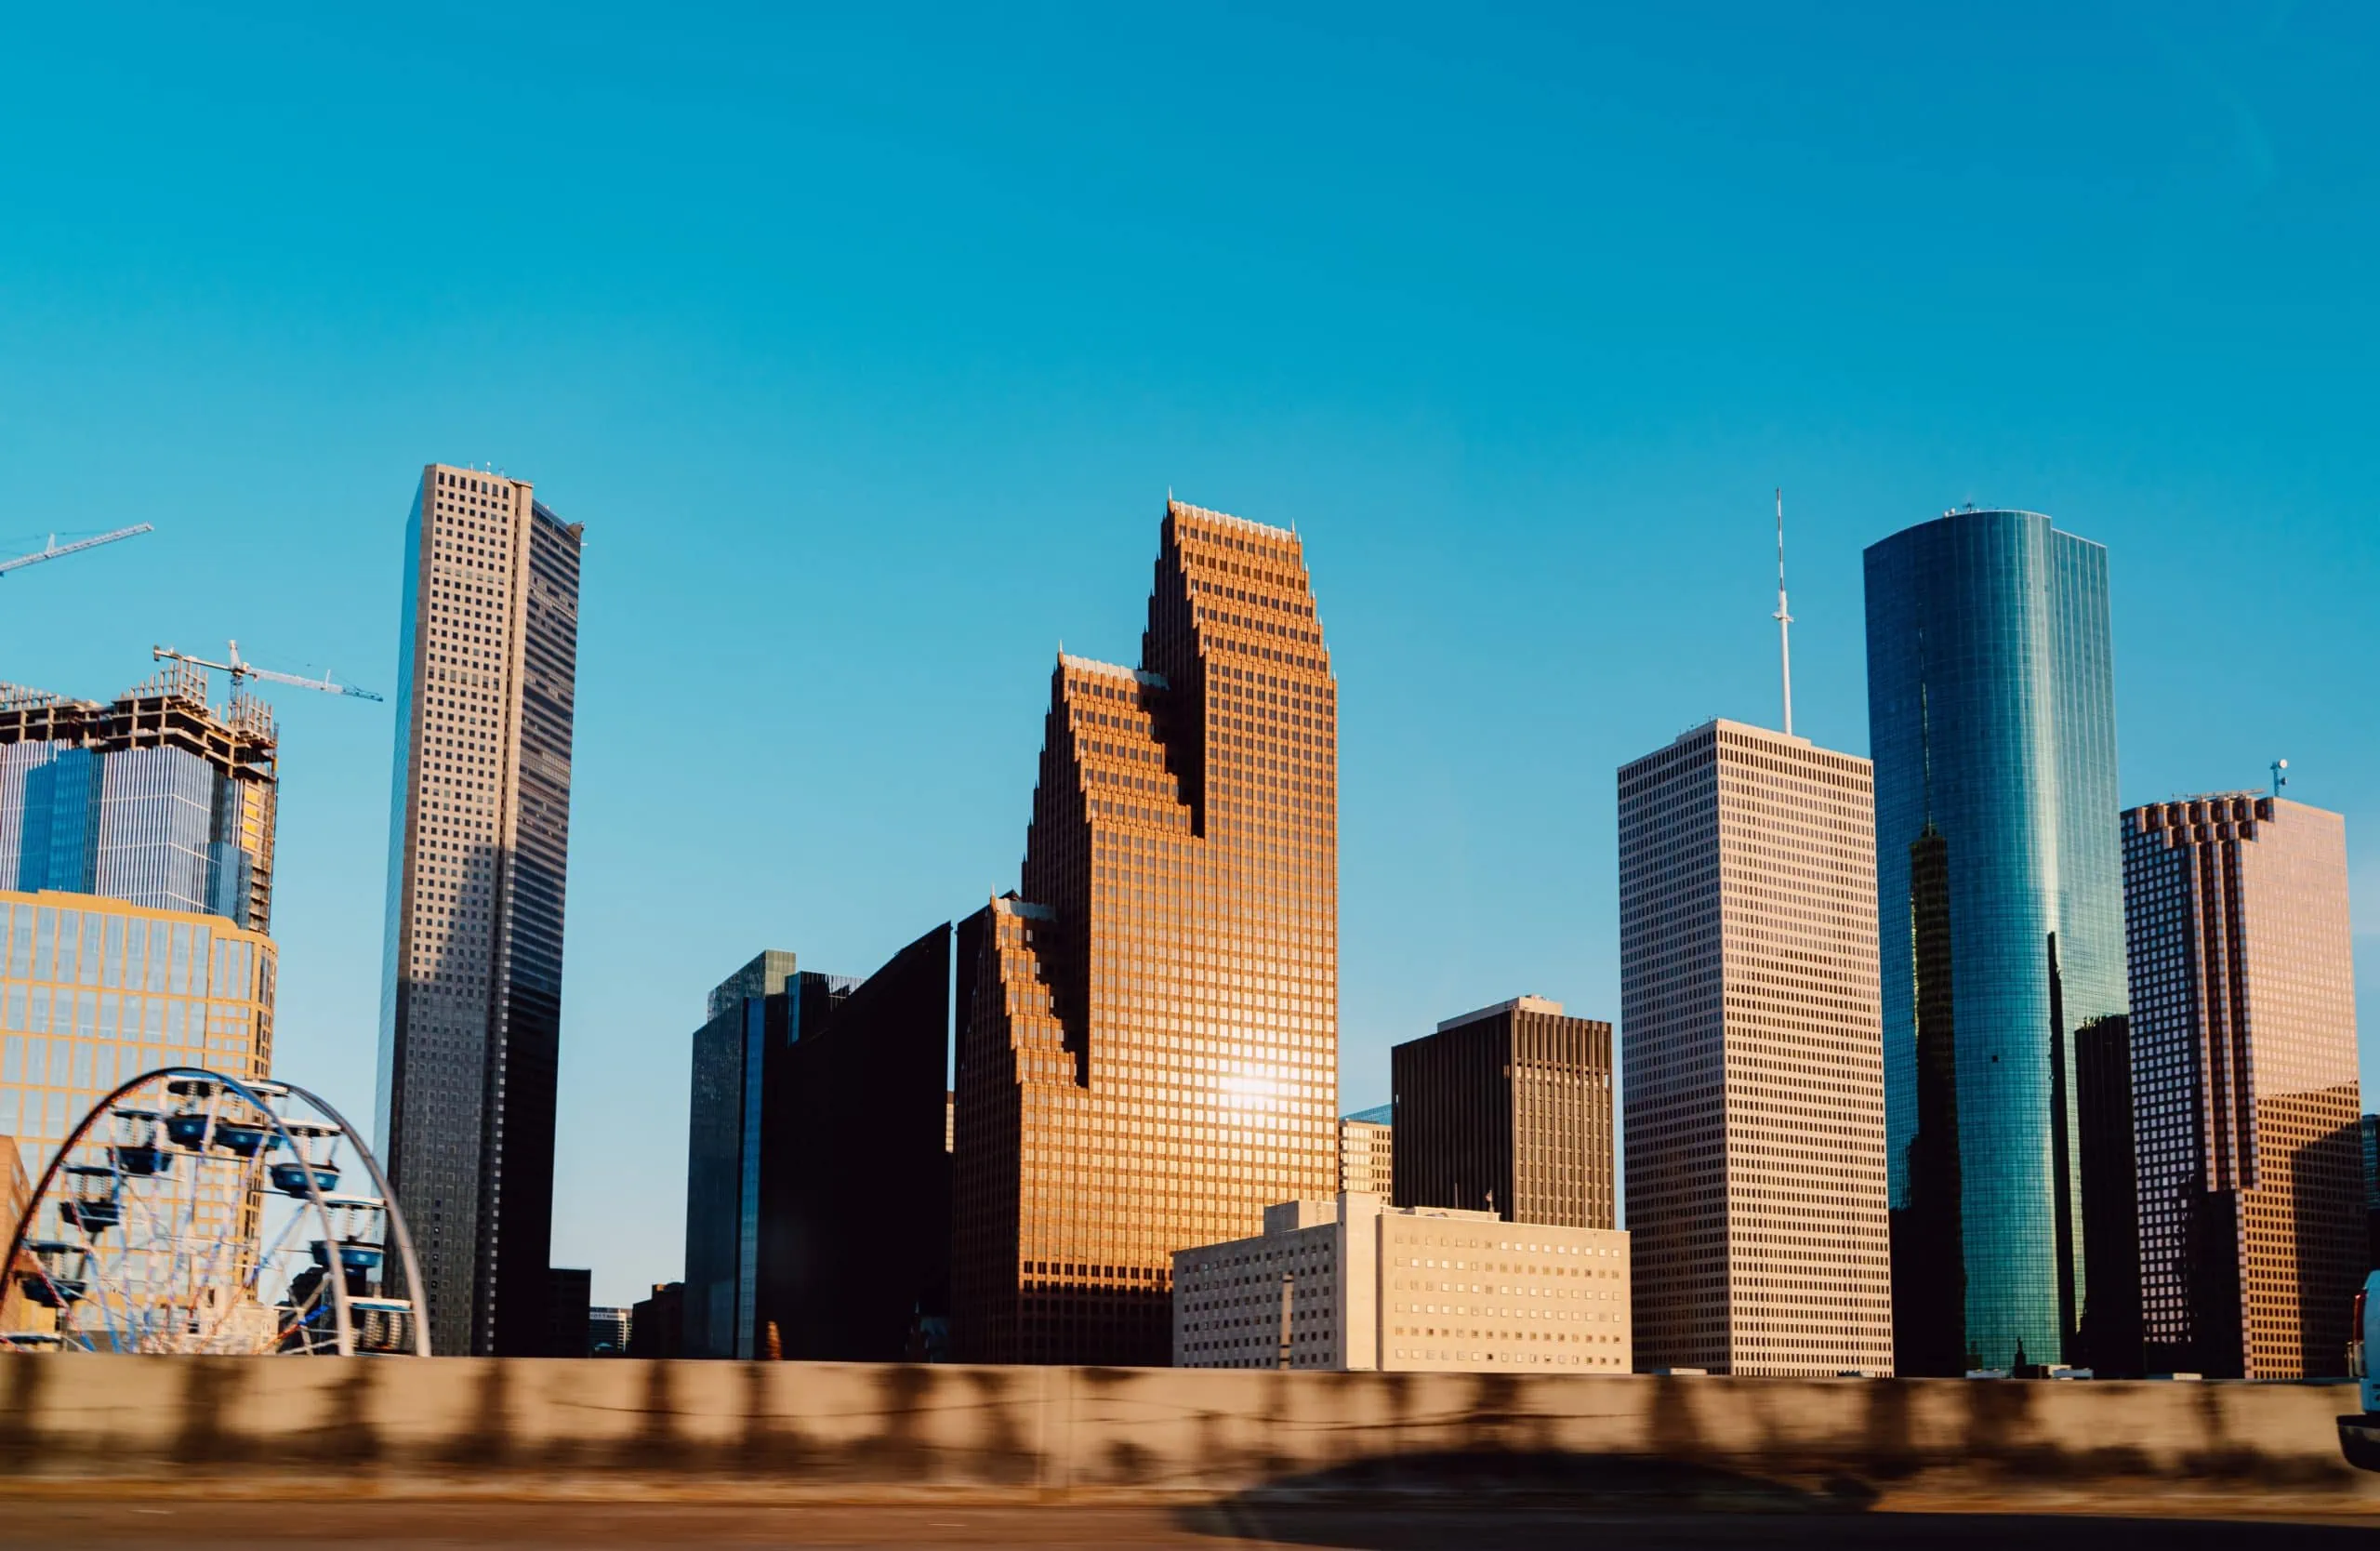 Skyline of Houston Downtown with businesses that are secured by surveillance cameras